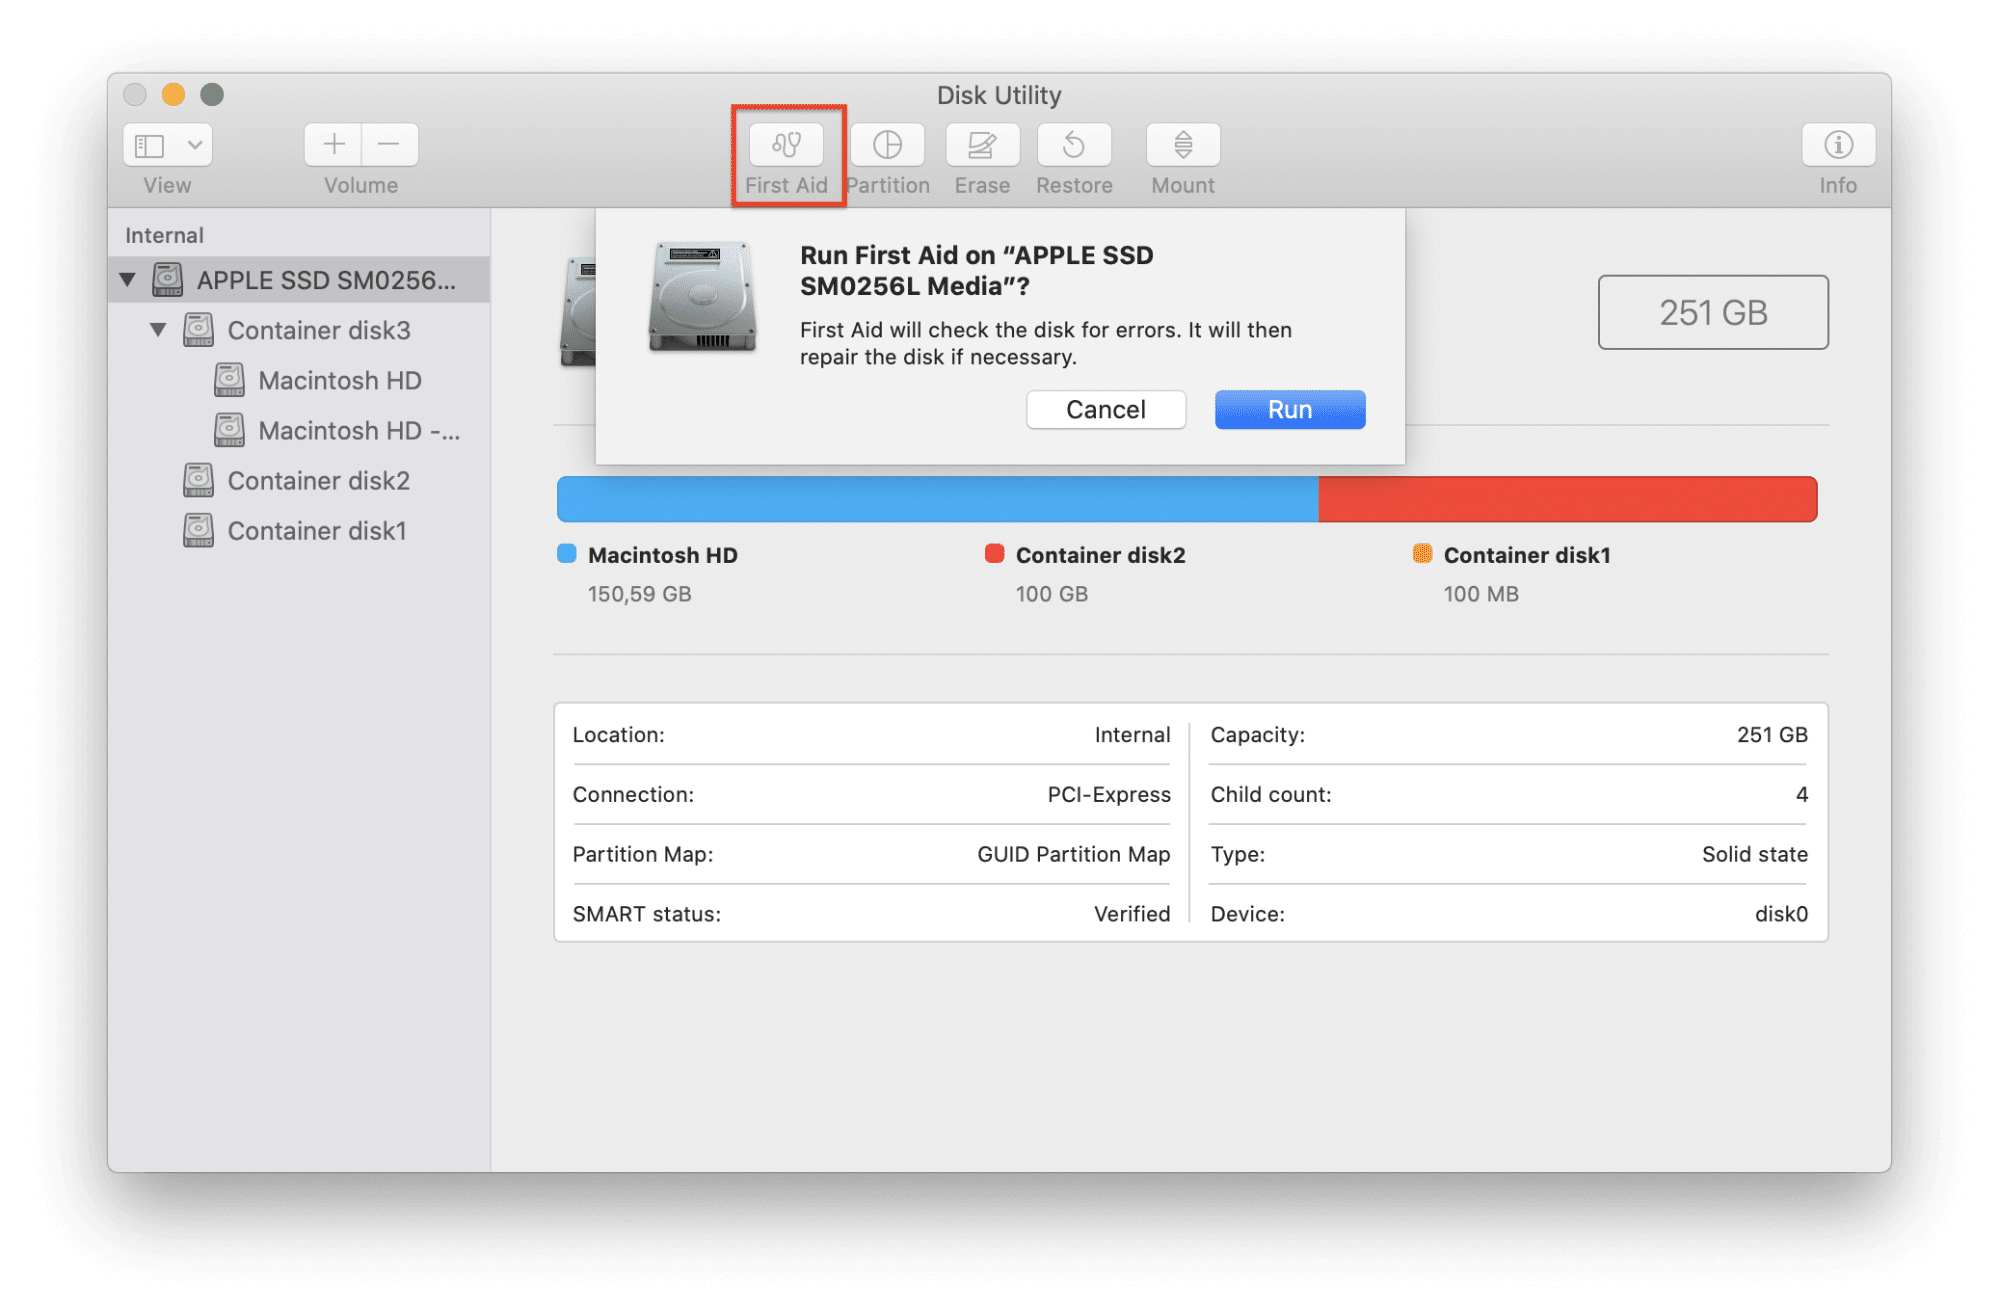 Disk Utility - Check disk for errors window